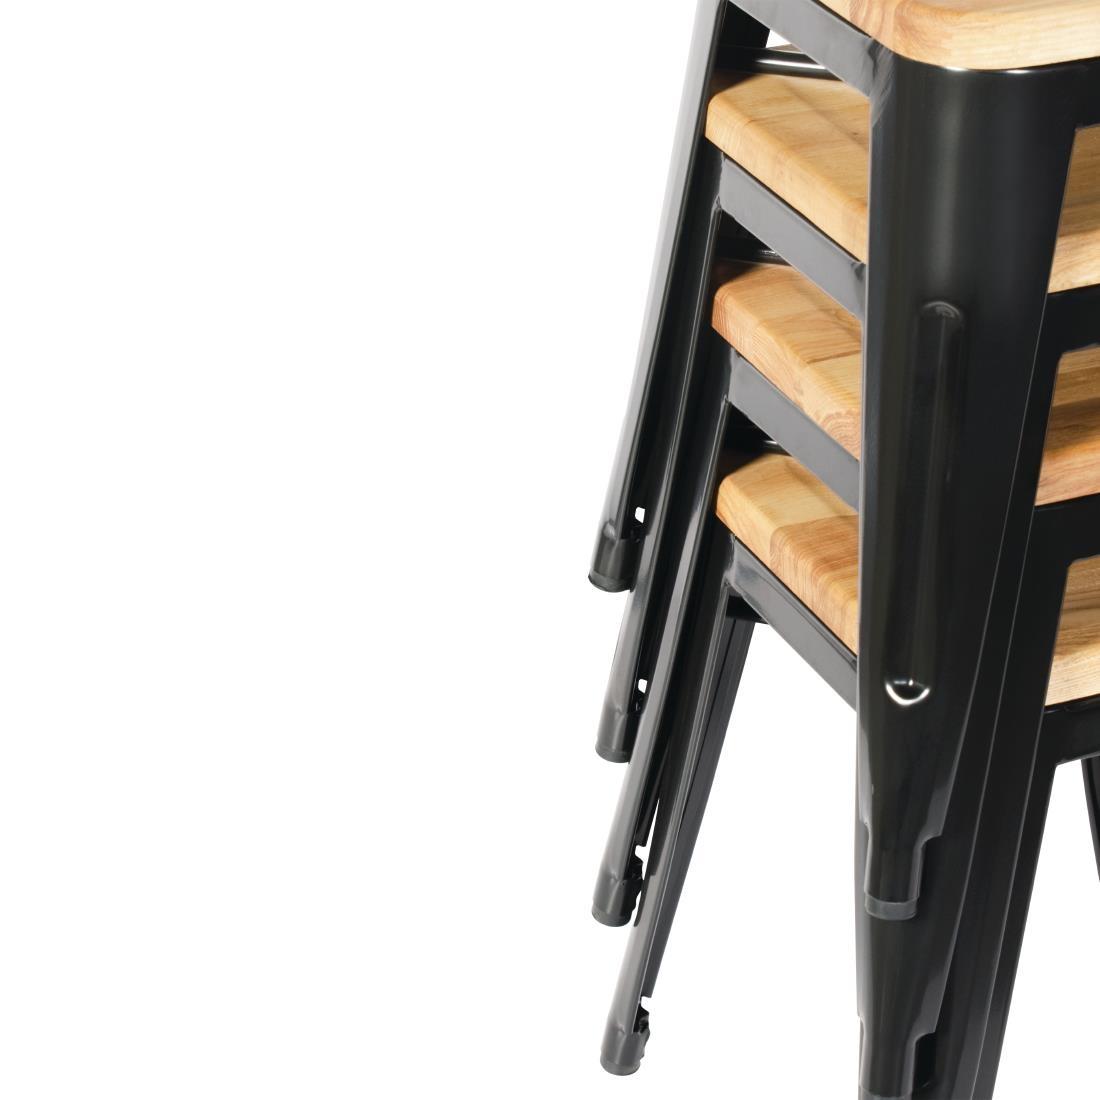 Bolero Bistro Low Stools with Wooden Seat Pad Black (Pack of 4) - GM635  - 4